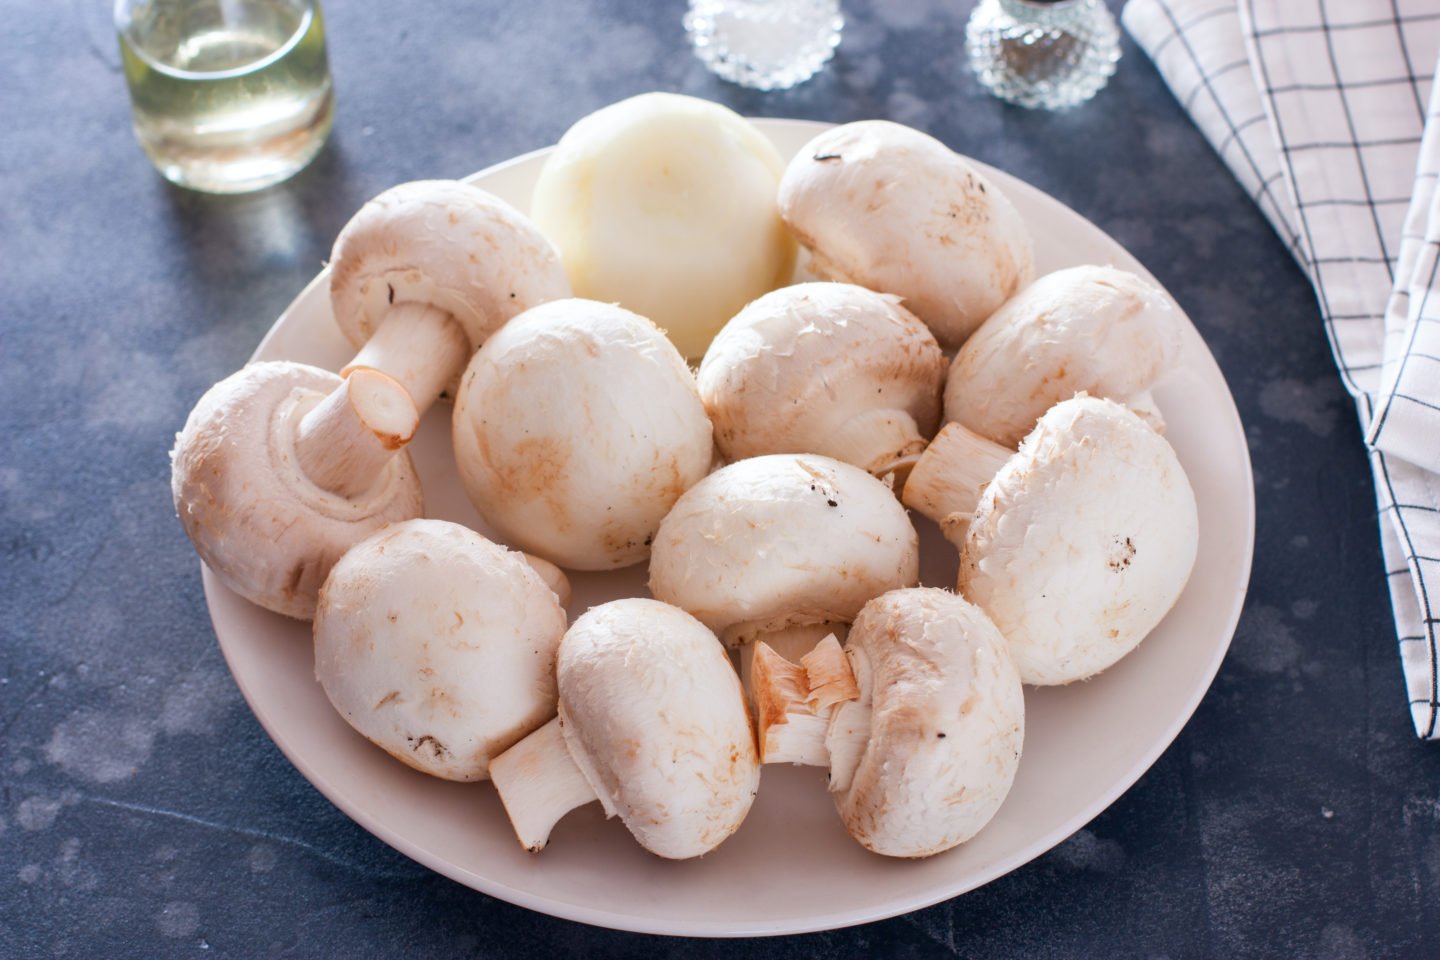 clean white button mushrooms on plate